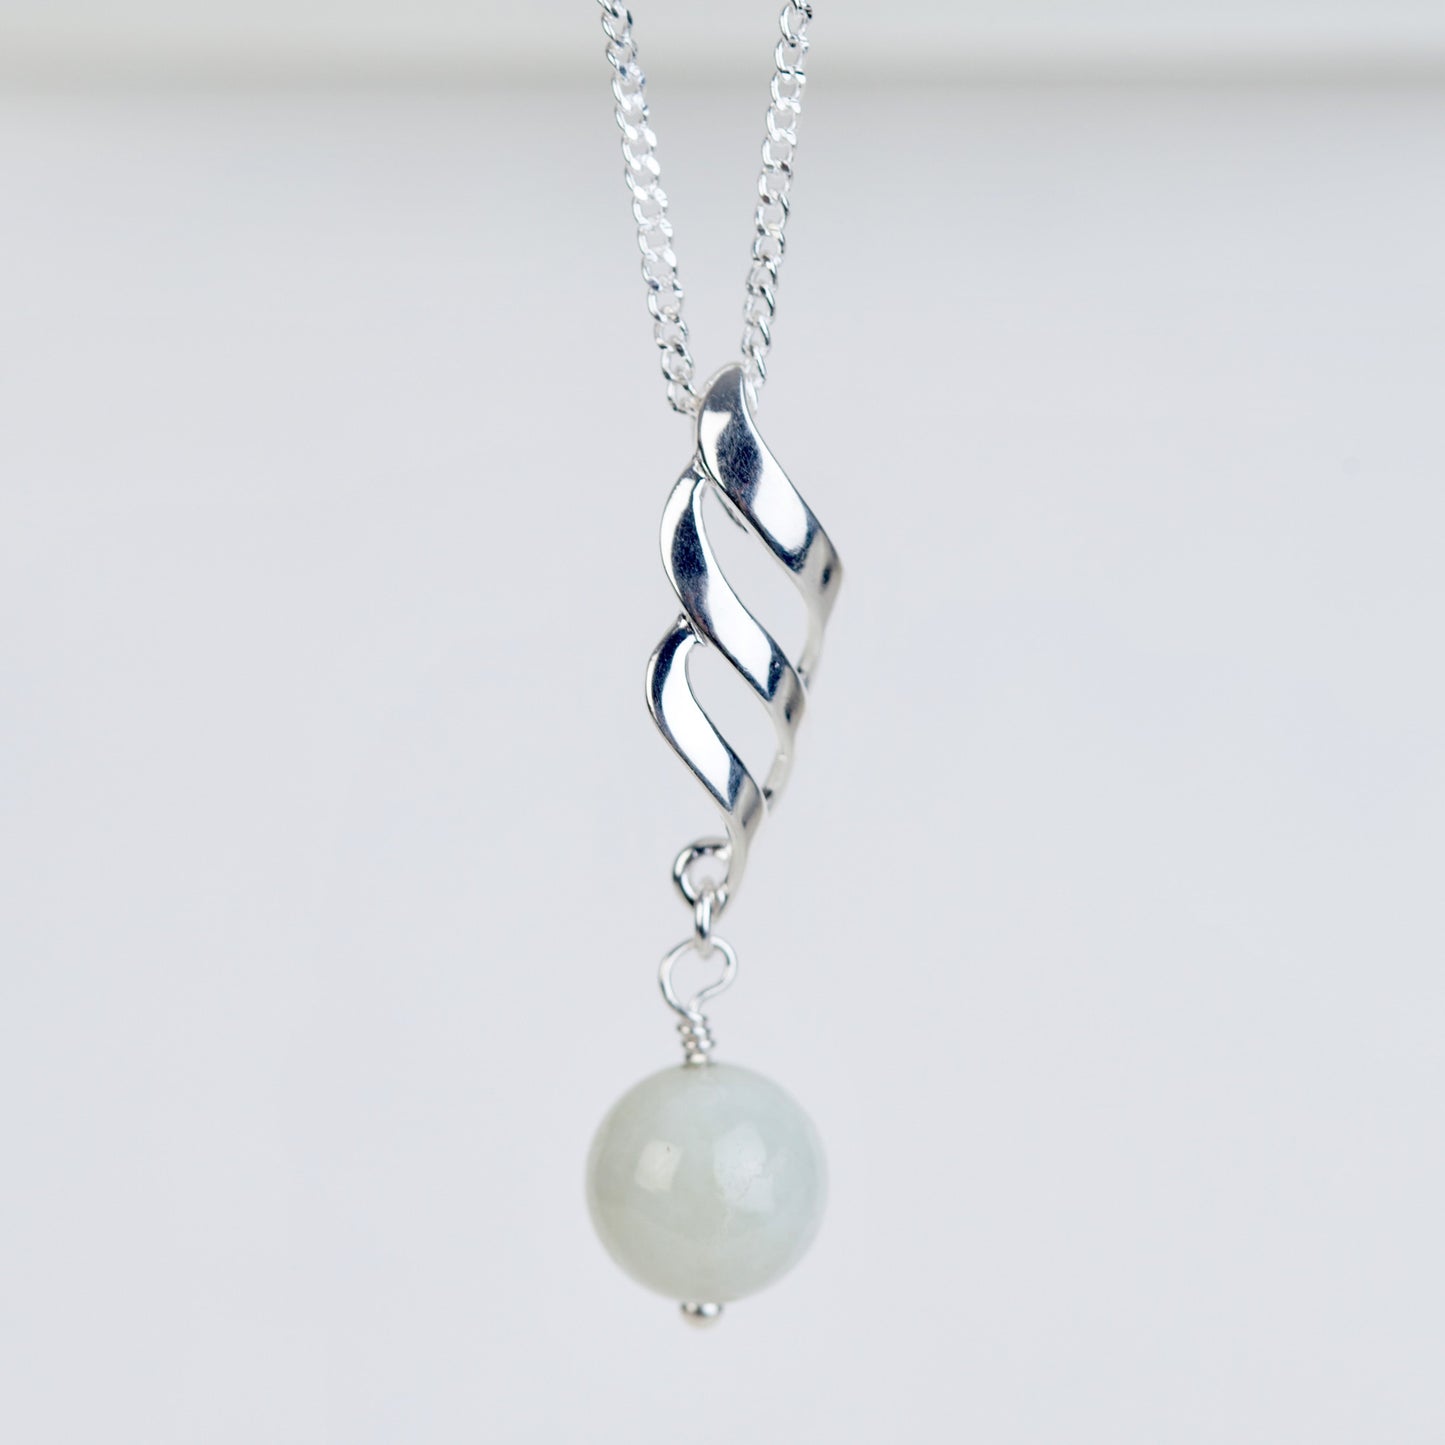 Jadeite and sterling silver twisted pendant necklace